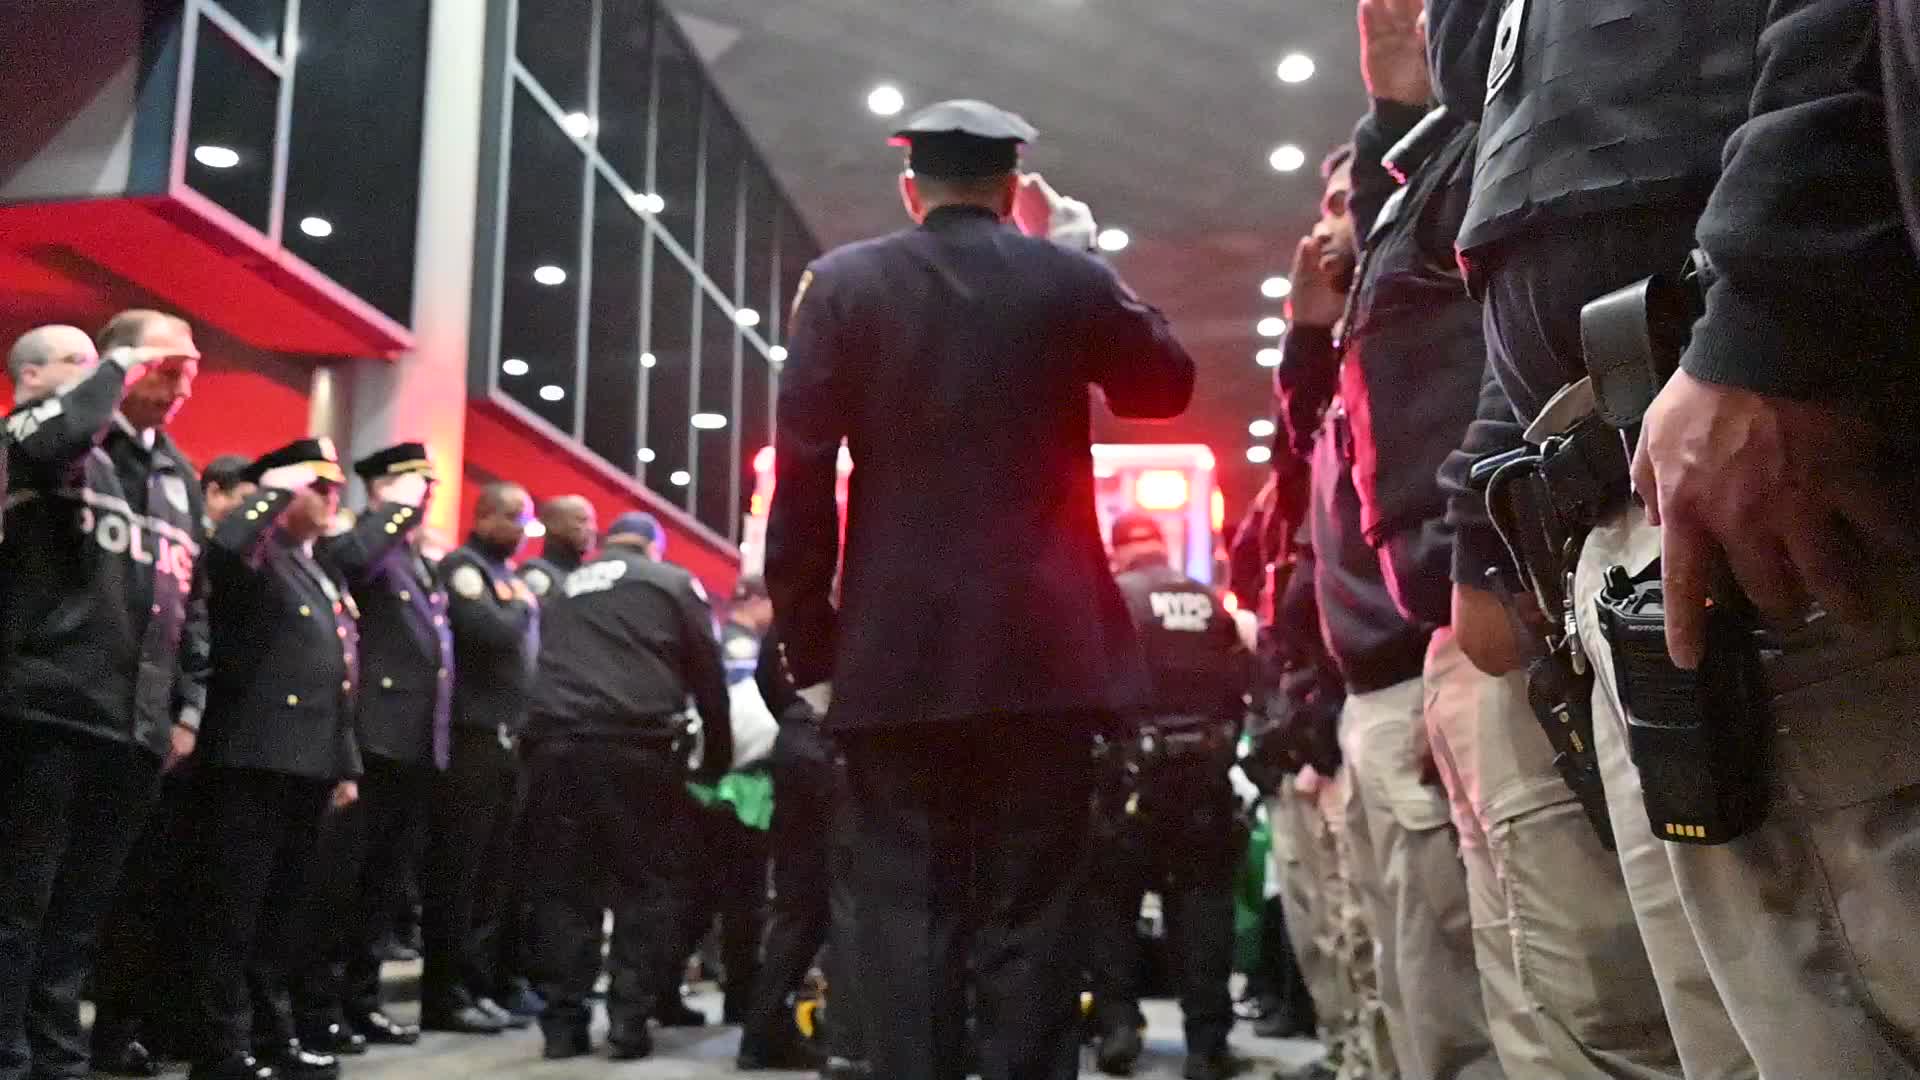 Dignified Transfer Of NYPD Officer Jonathan Diller At Jamaica Hospital In Queens New York